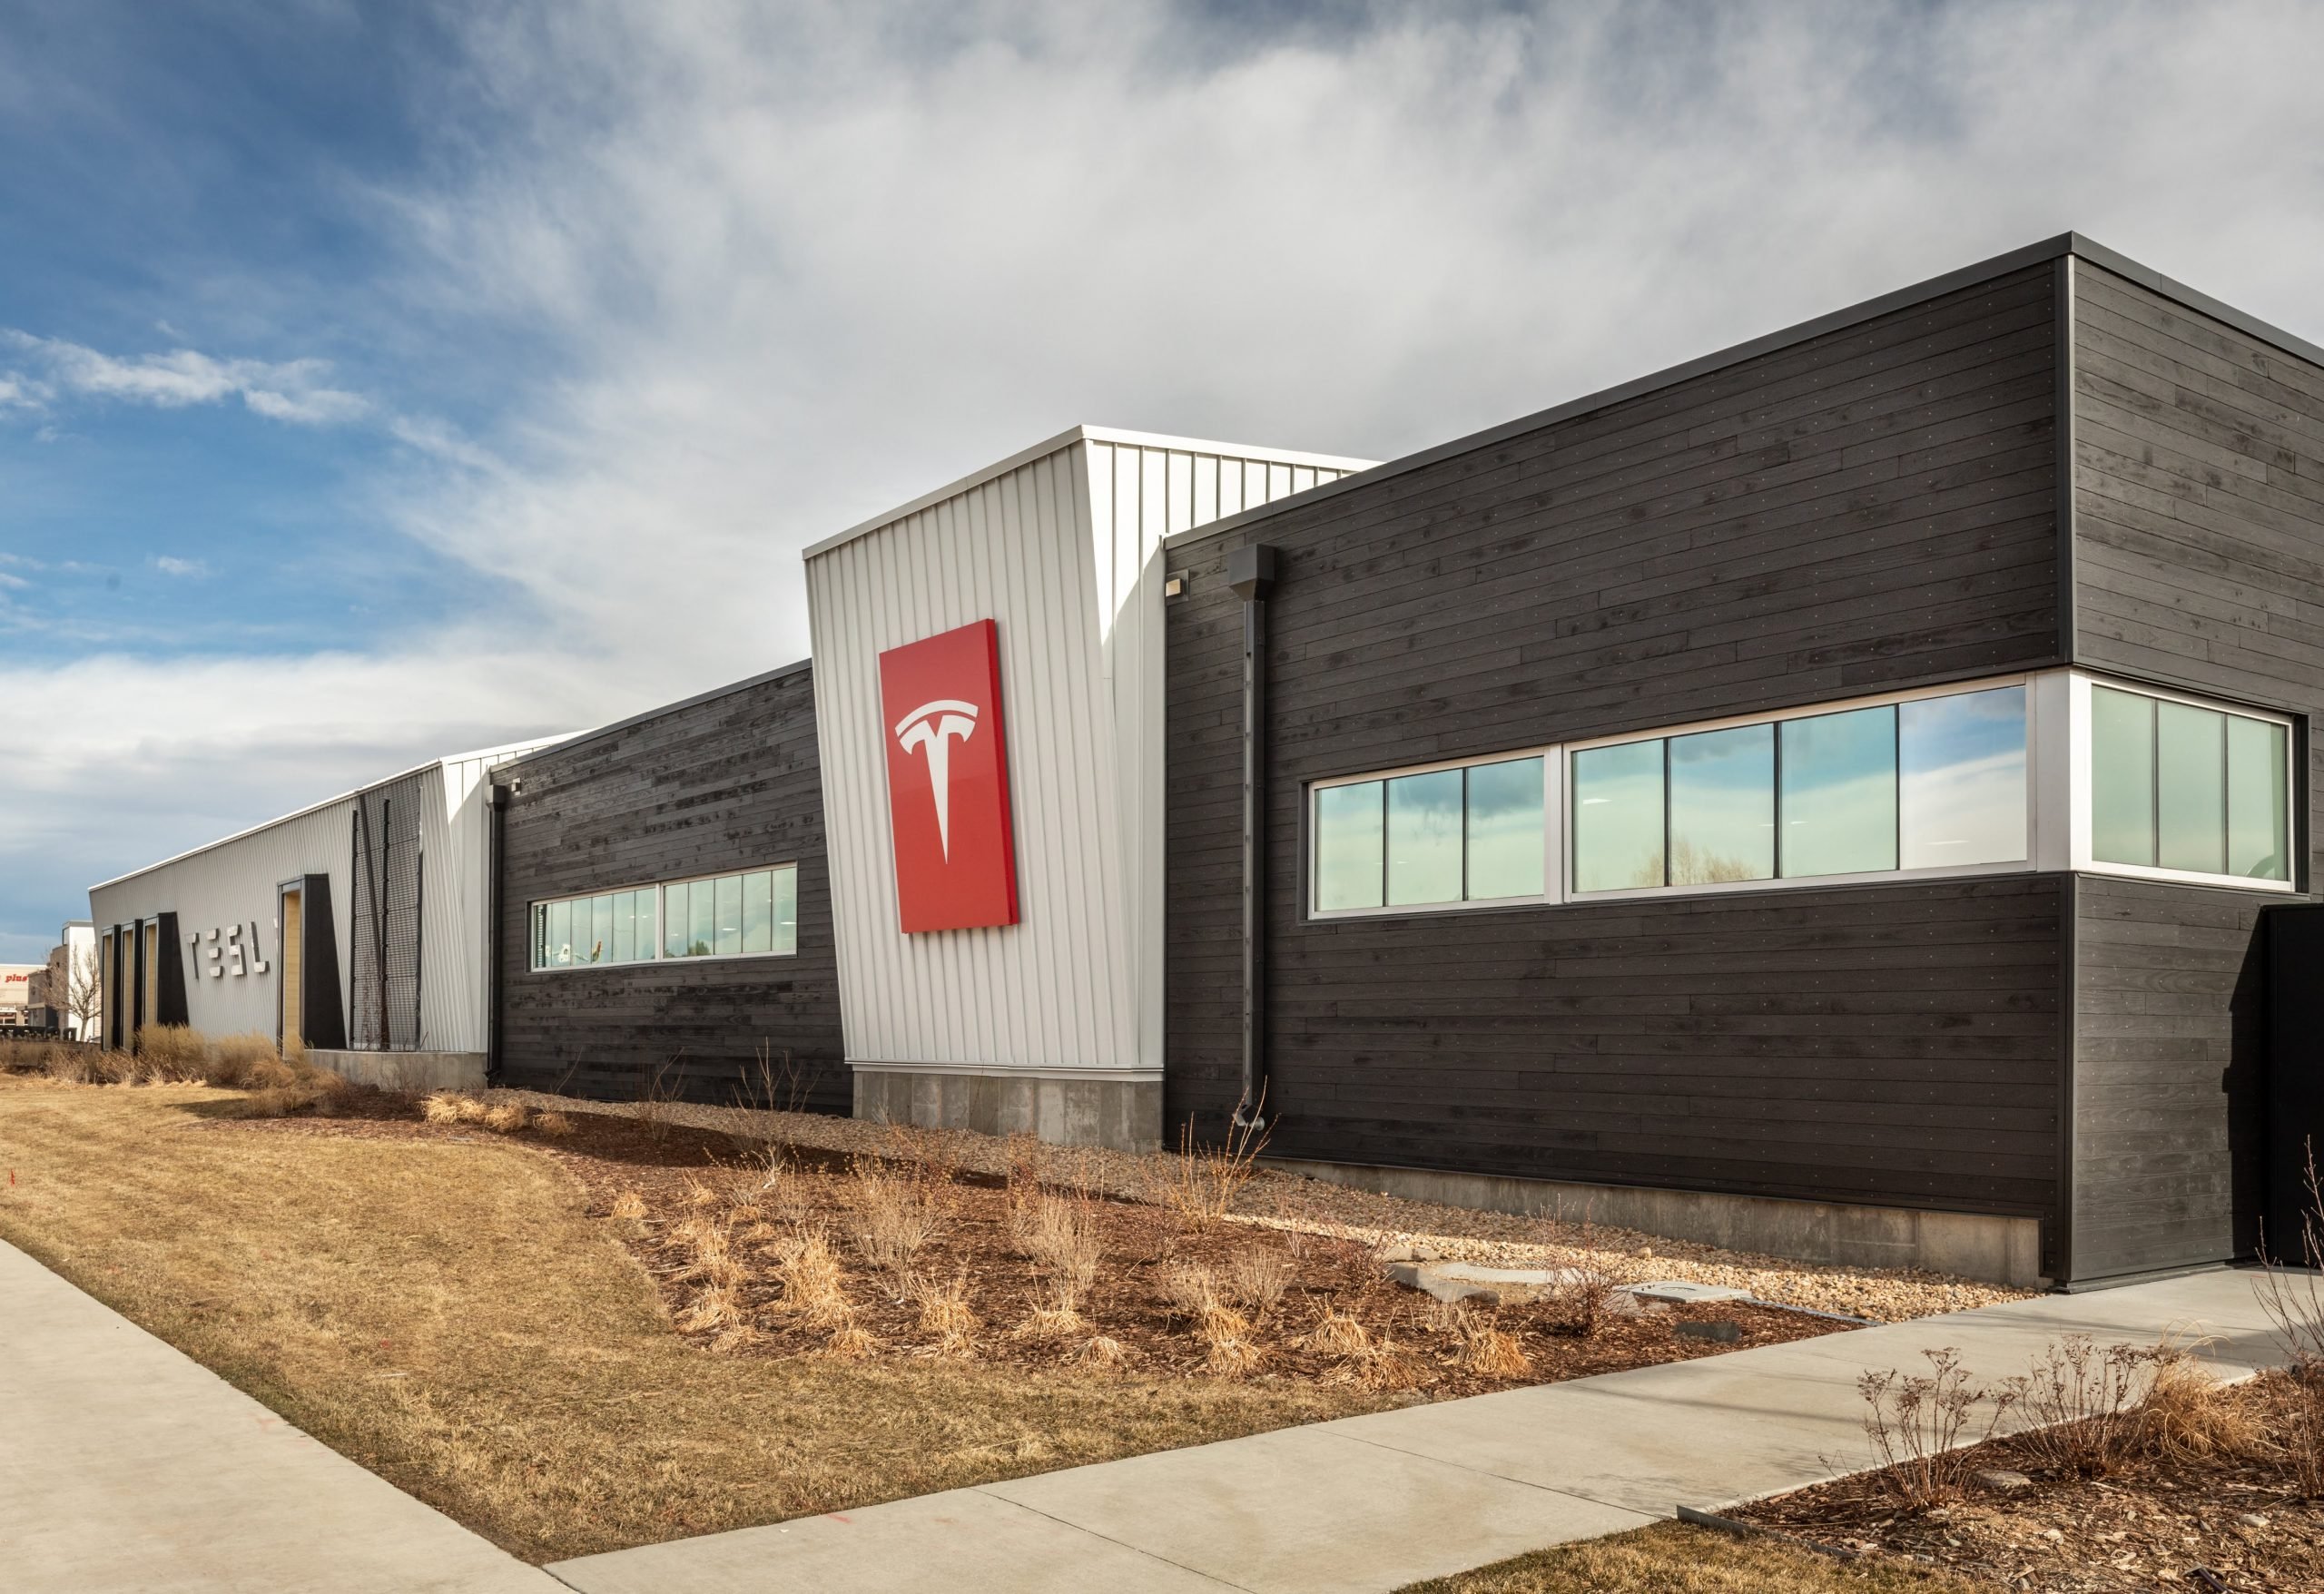 Three quarter's view of the Tesla Showroom in Denver Colorado features Kebony clear cladding with a red Tesla logo in the center and a cloudy sky in the background